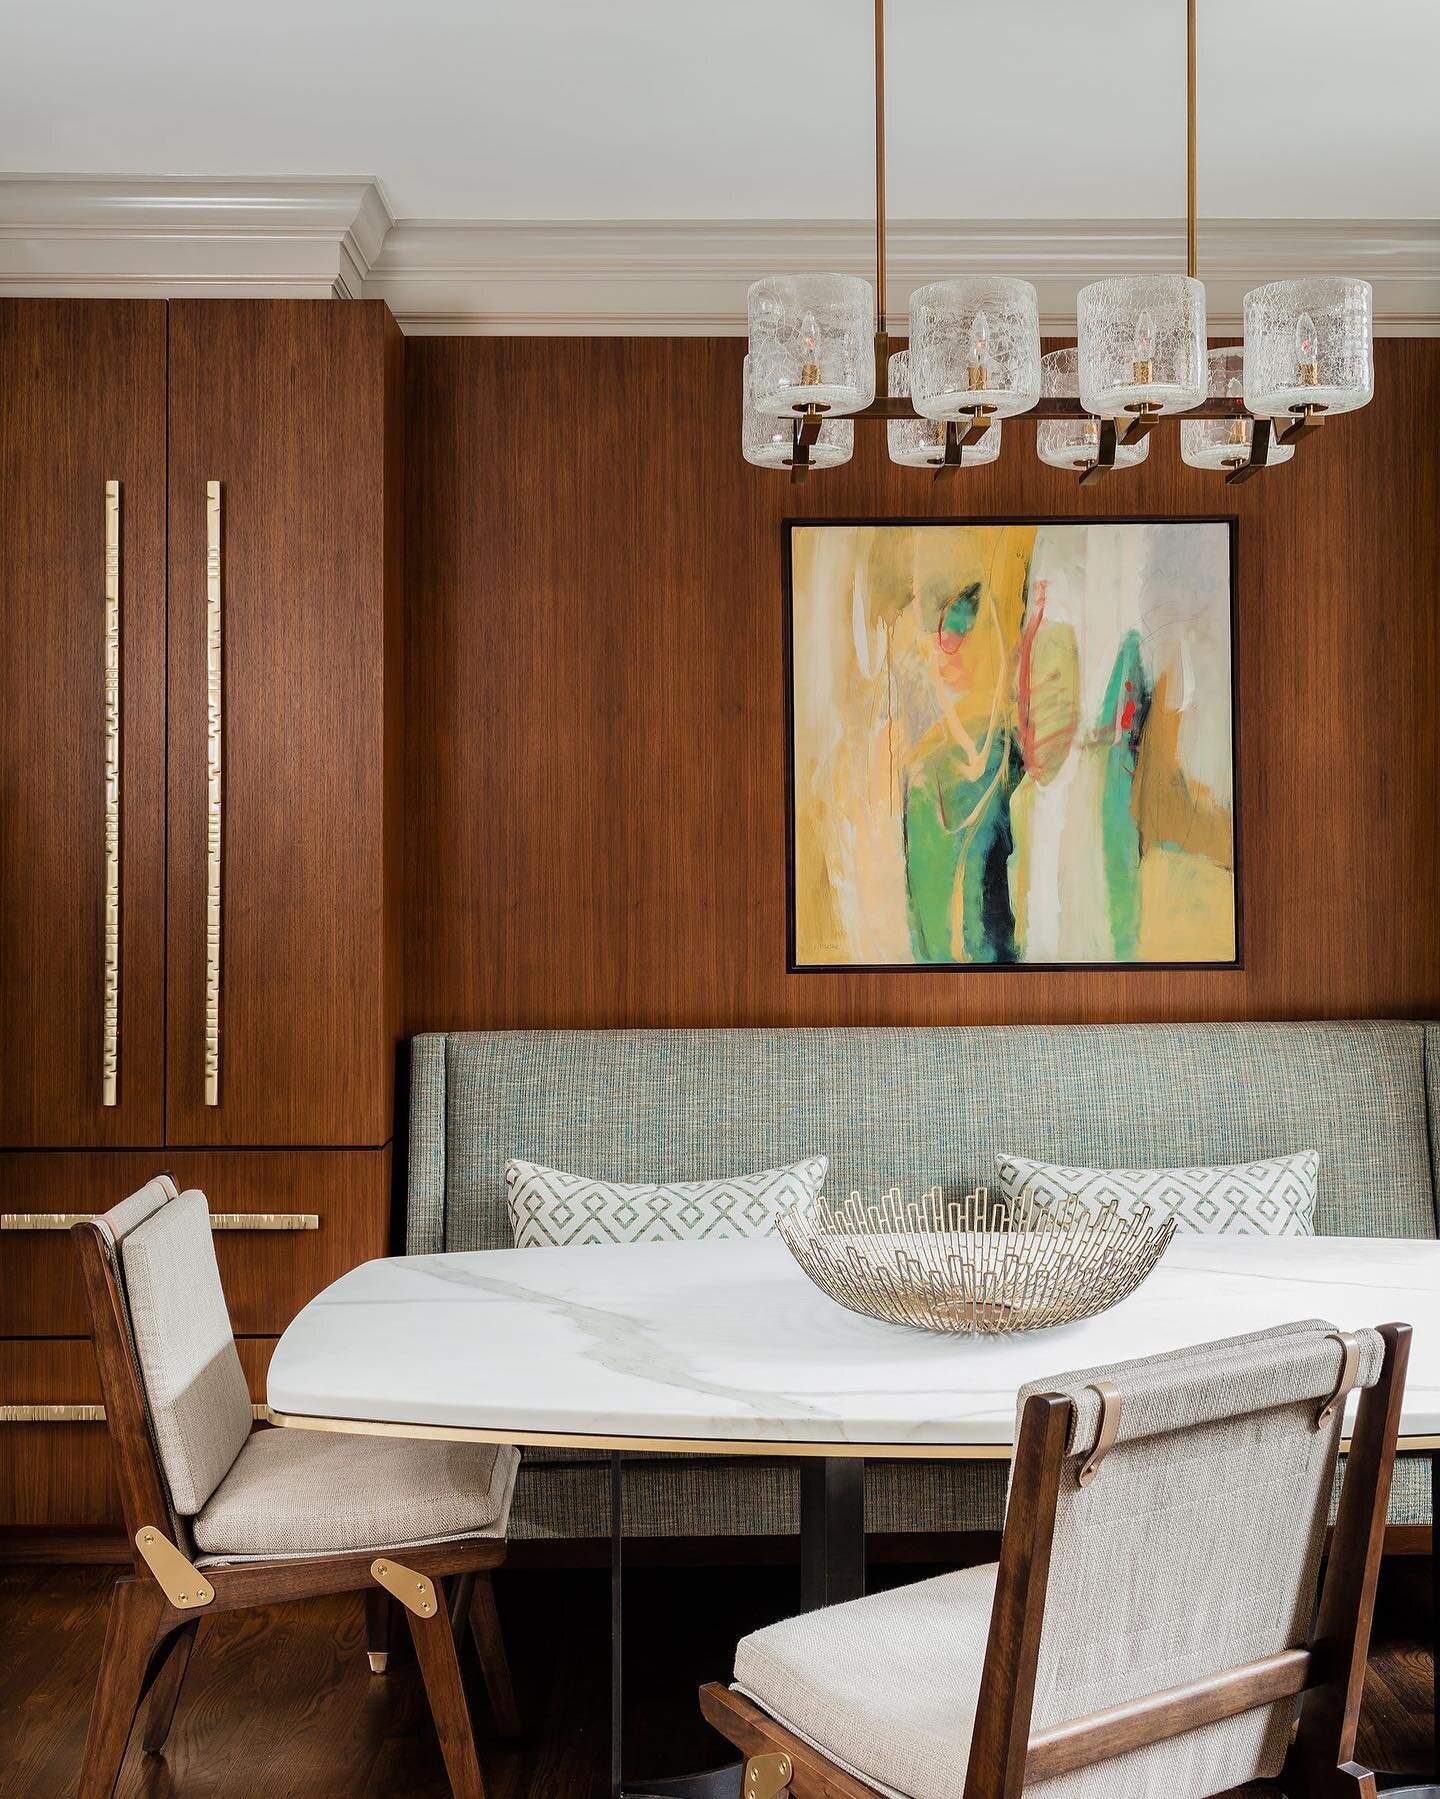 3/9 𝓐𝓻𝓵𝓲𝓷𝓰𝓽𝓸𝓷
-
Artwork by Clara Blalock hangs in the breakfast area, which is outfitted with a custom table and banquette with chairs by Richard Wrightman Design.
-
Photography: @michaeljleephotography